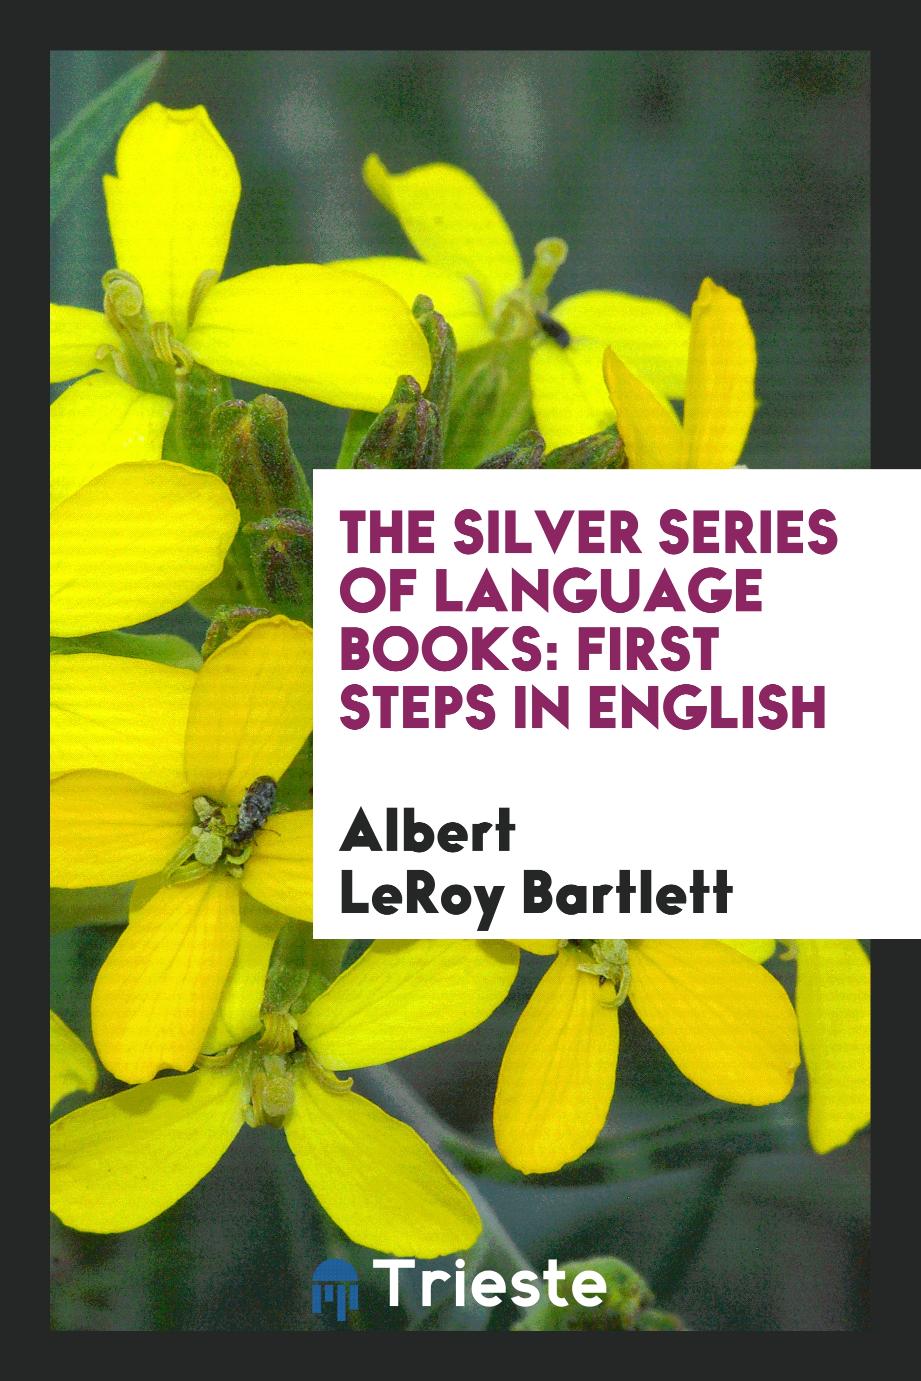 The Silver Series of Language Books: First Steps in English